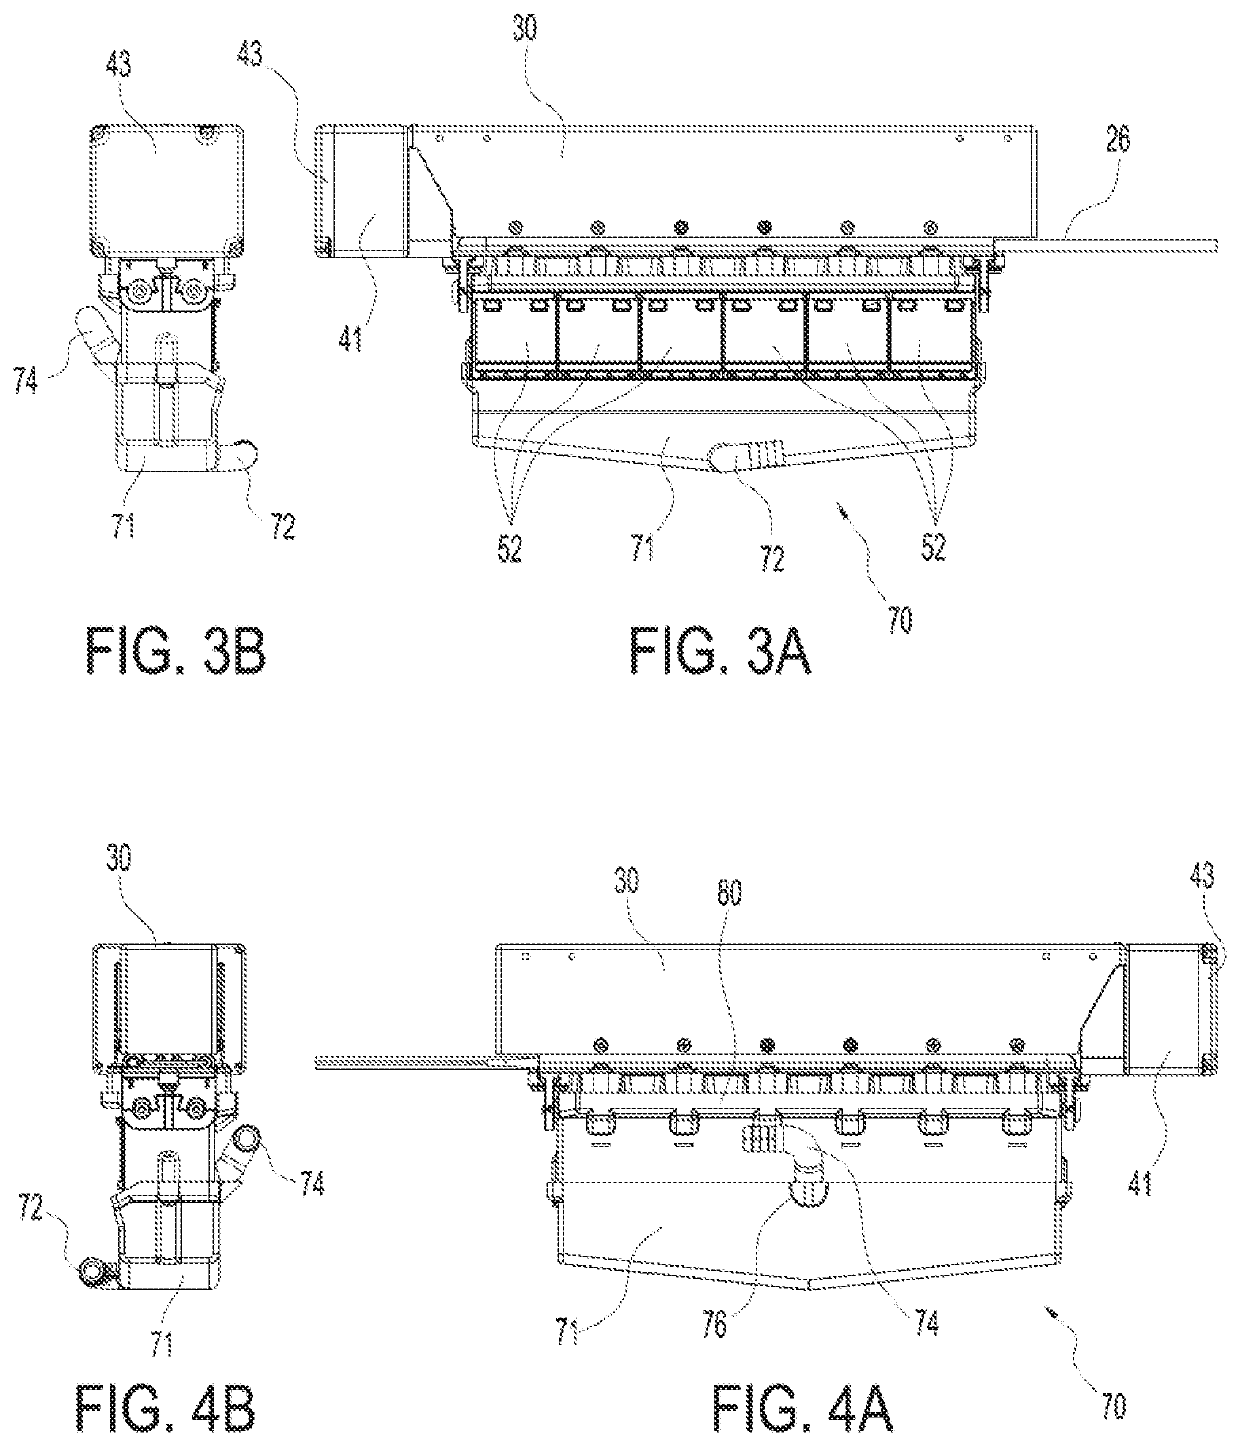 Clear ice maker assembly for production and storage of clear ice within a home refrigerator appliance